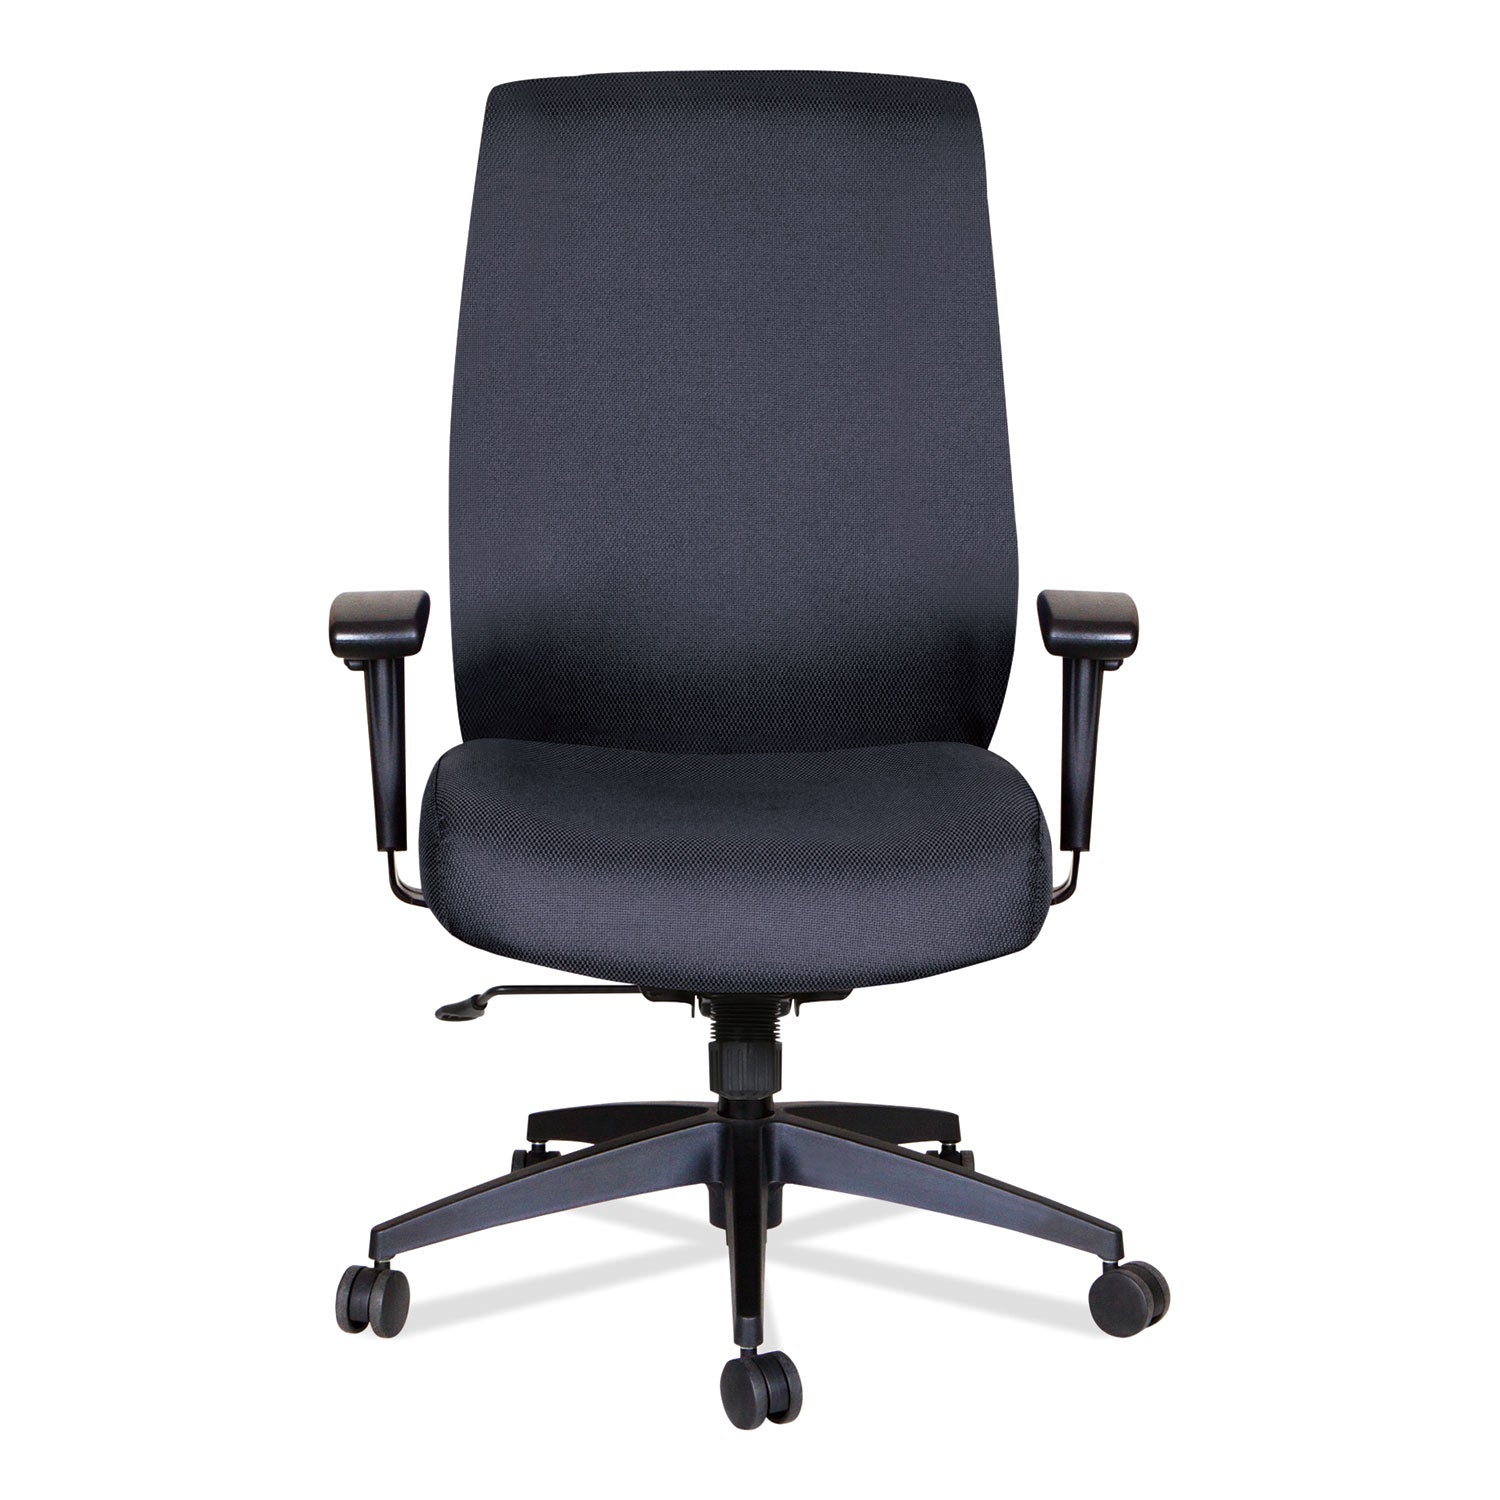 alera-wrigley-series-high-performance-high-back-synchro-tilt-task-chair-supports-275-lb-1724-to-2055-seat-height-black_alehps4101 - 7